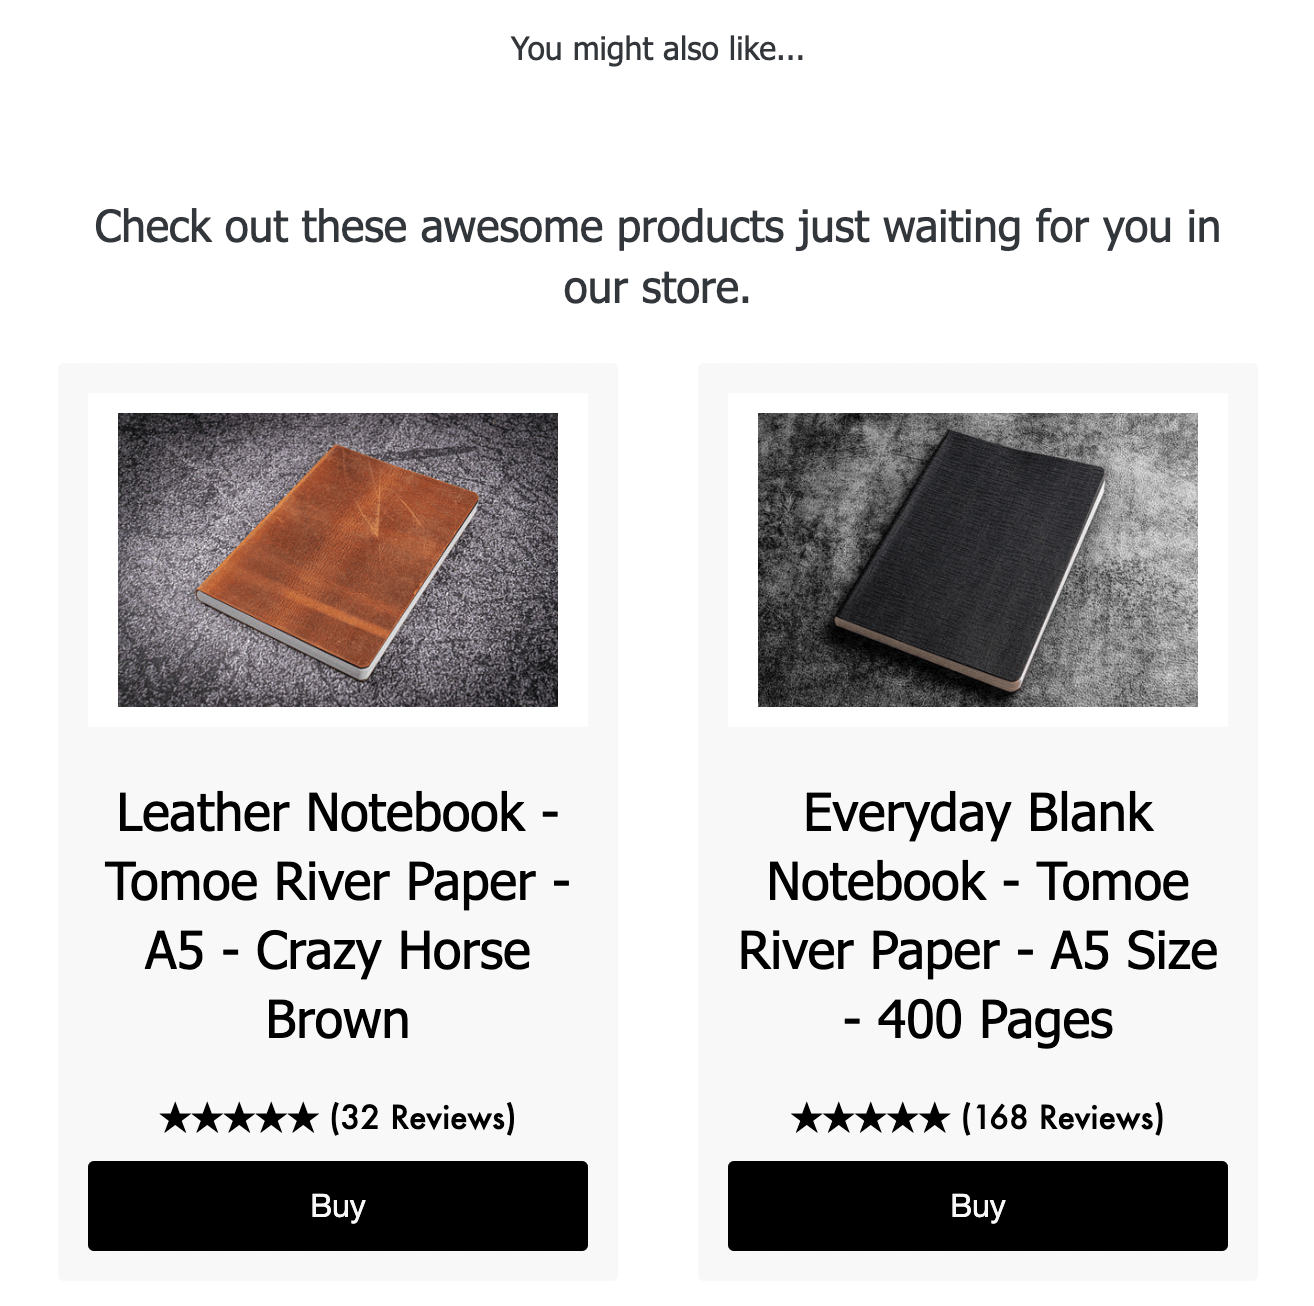 Post-purchase emails - Galen Leather - upsell email screenshot